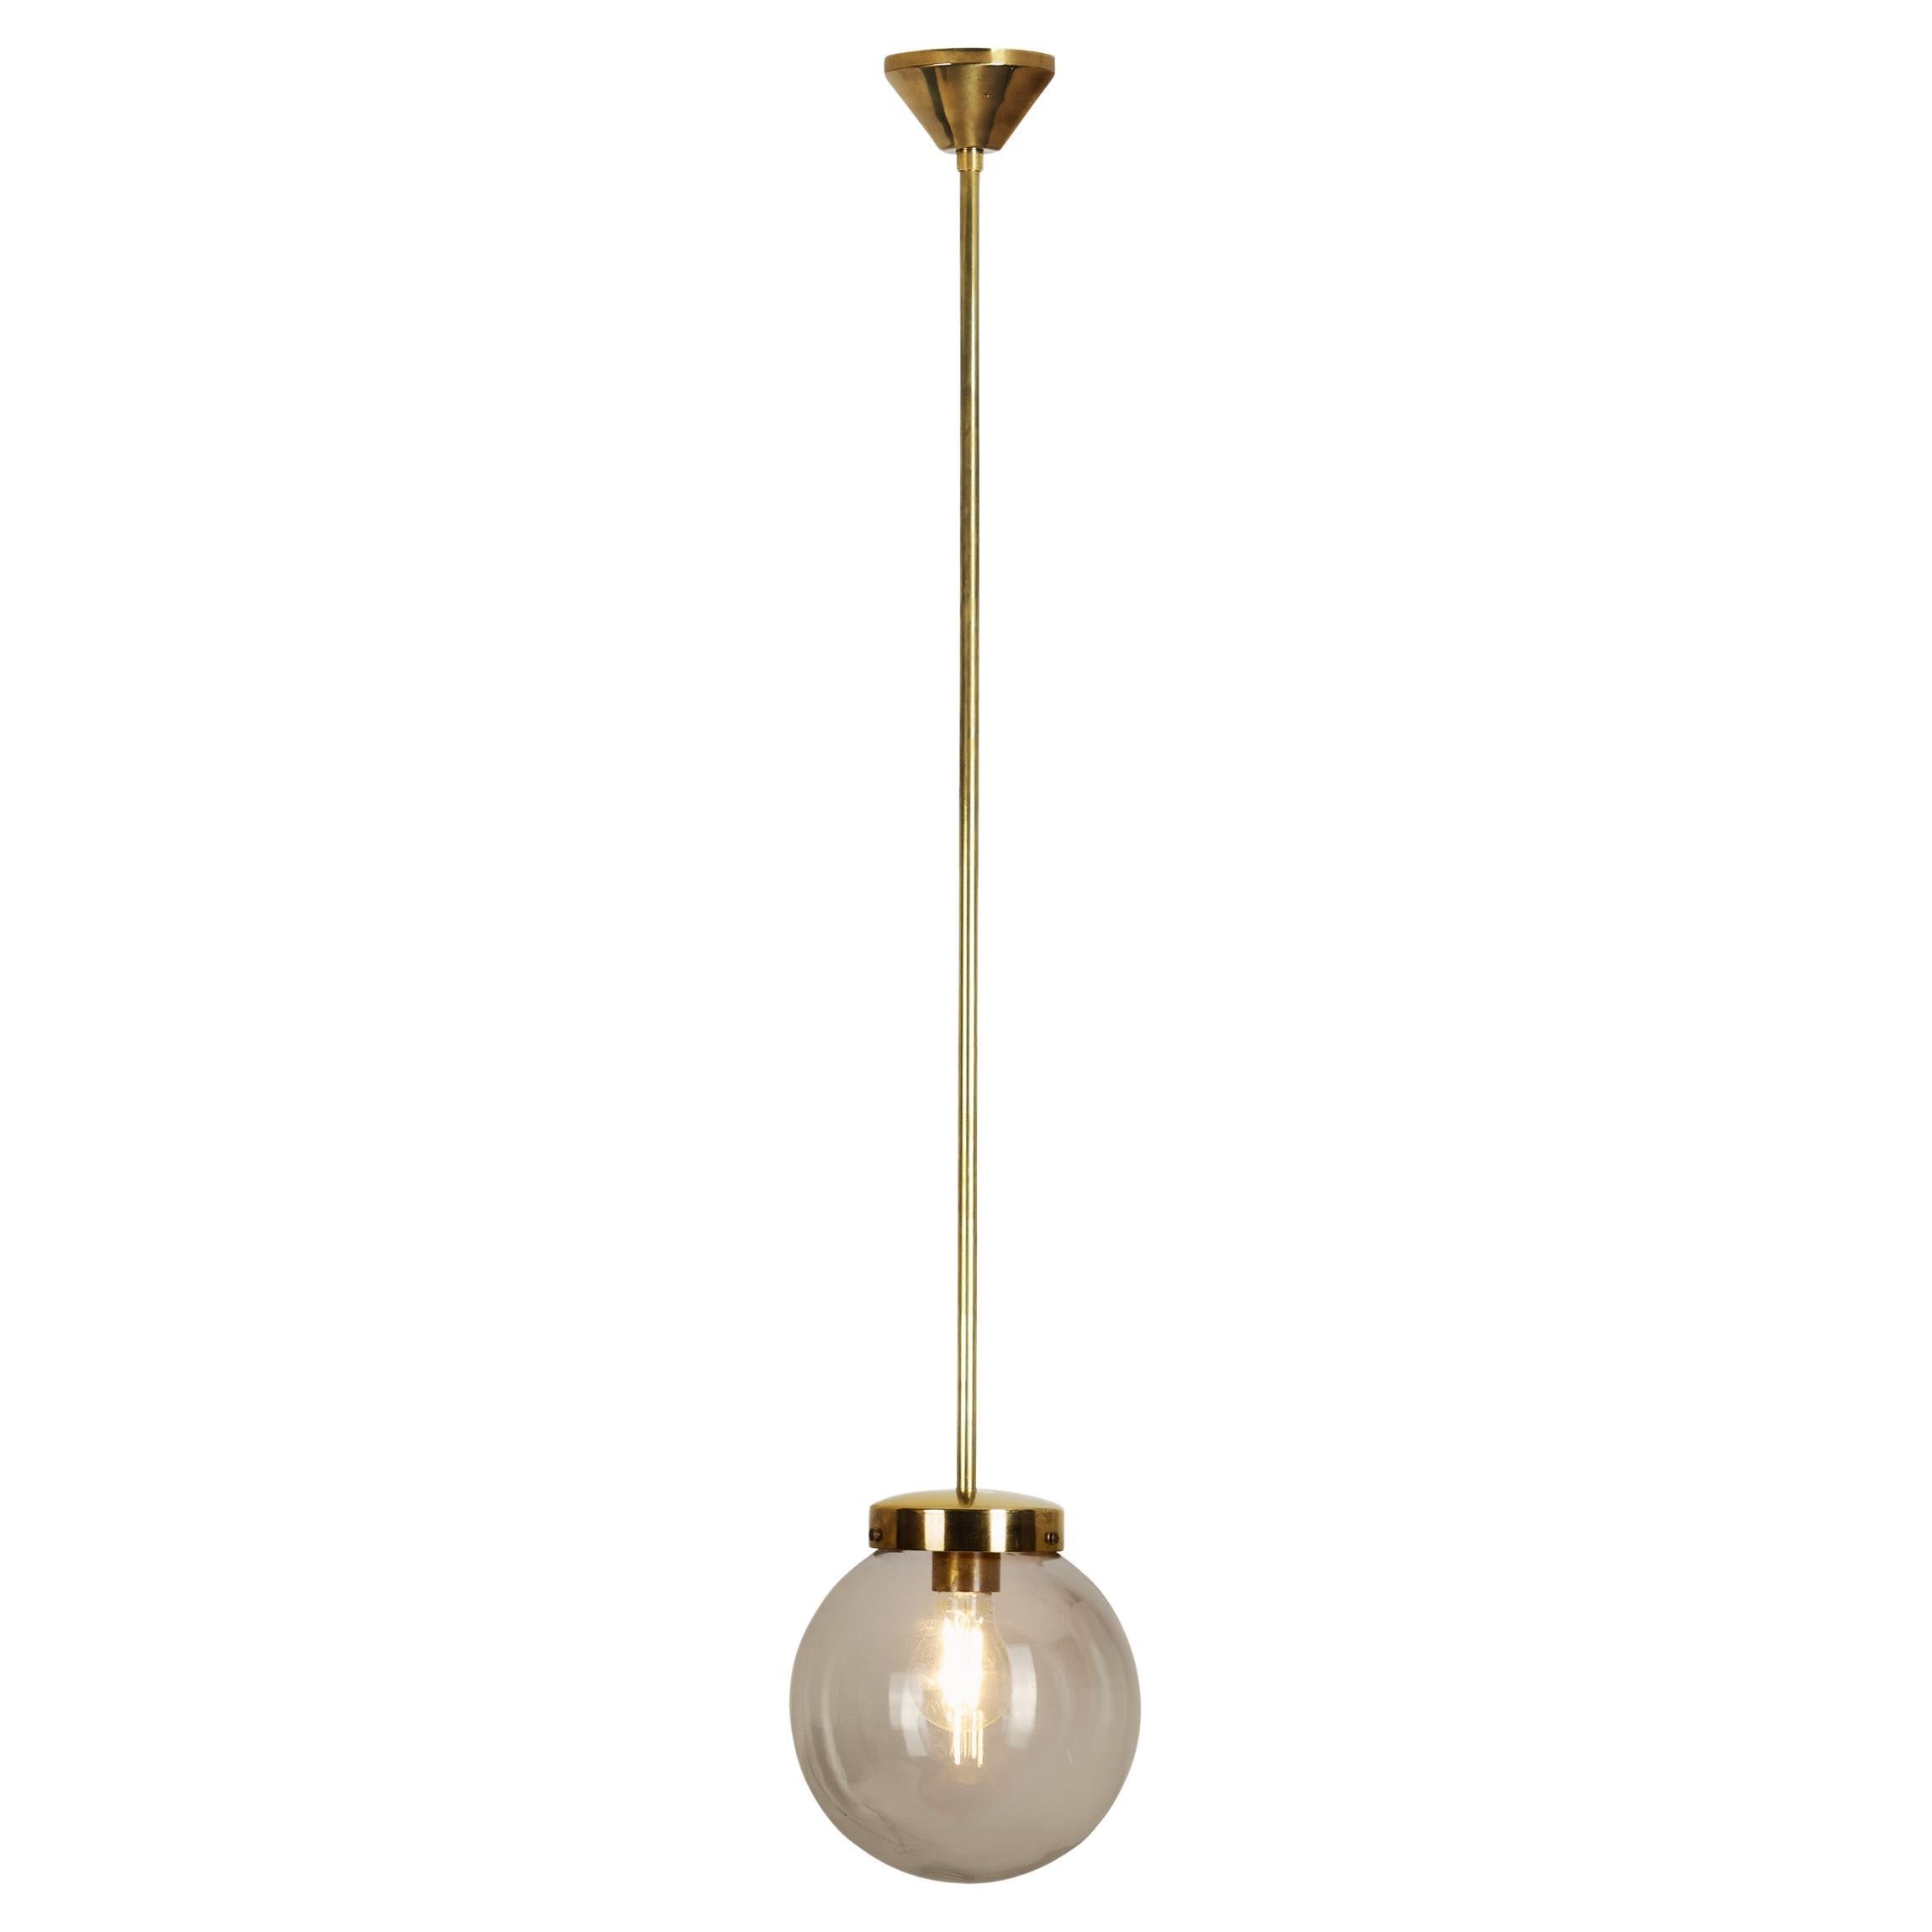 Mid-Century Modern Brass and Glass Ceiling Lamp, Europe ca 1950s For Sale